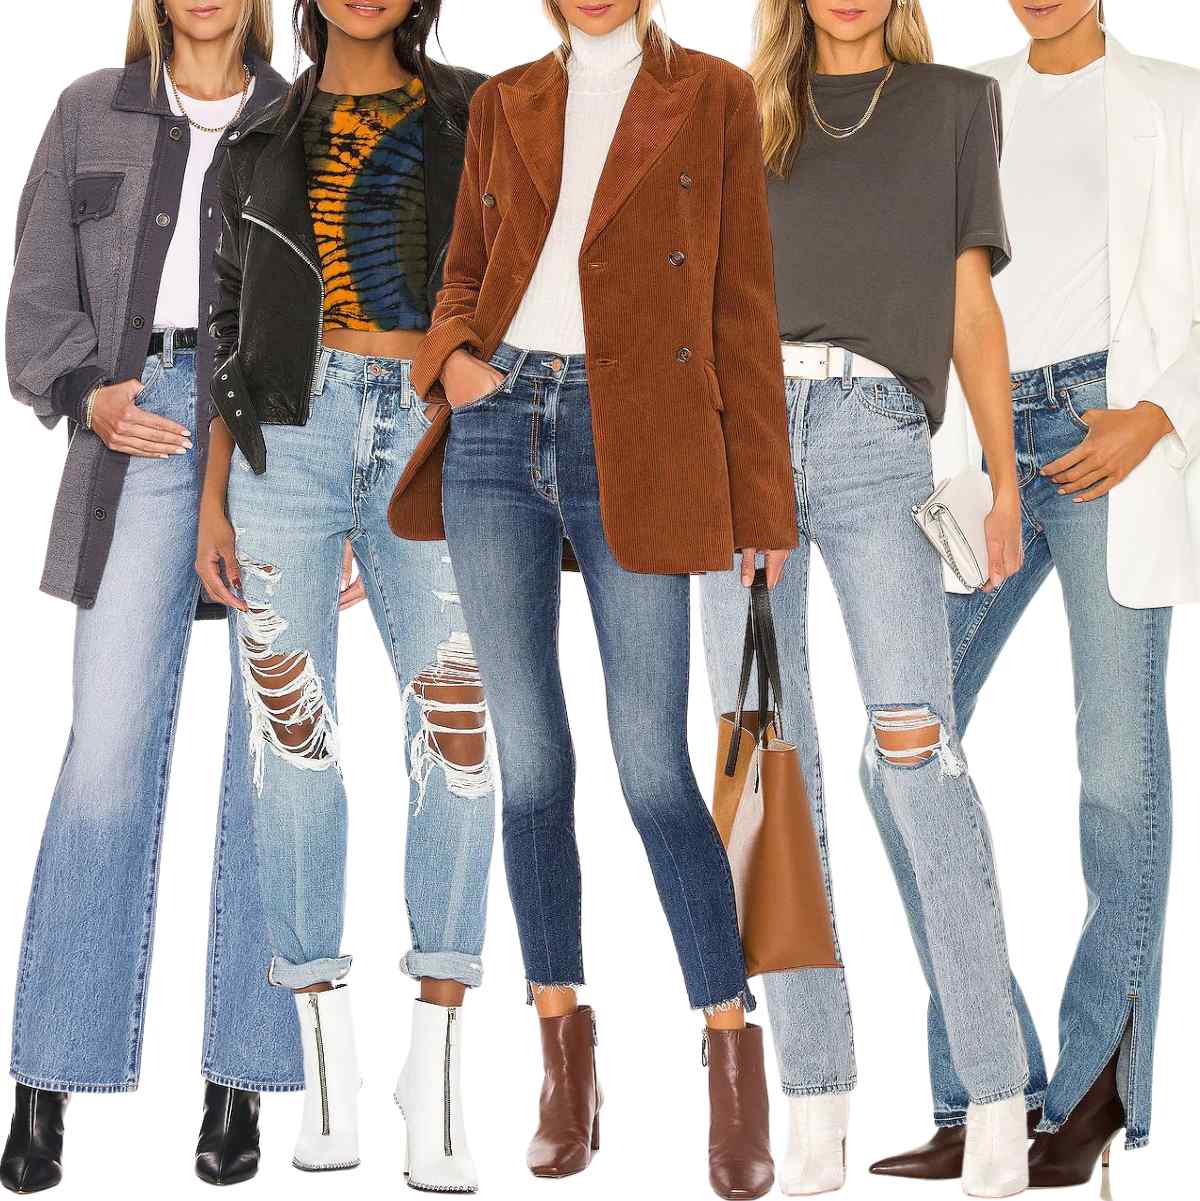 Collage of 5 women wearing different blue jean outfits with ankle boots.